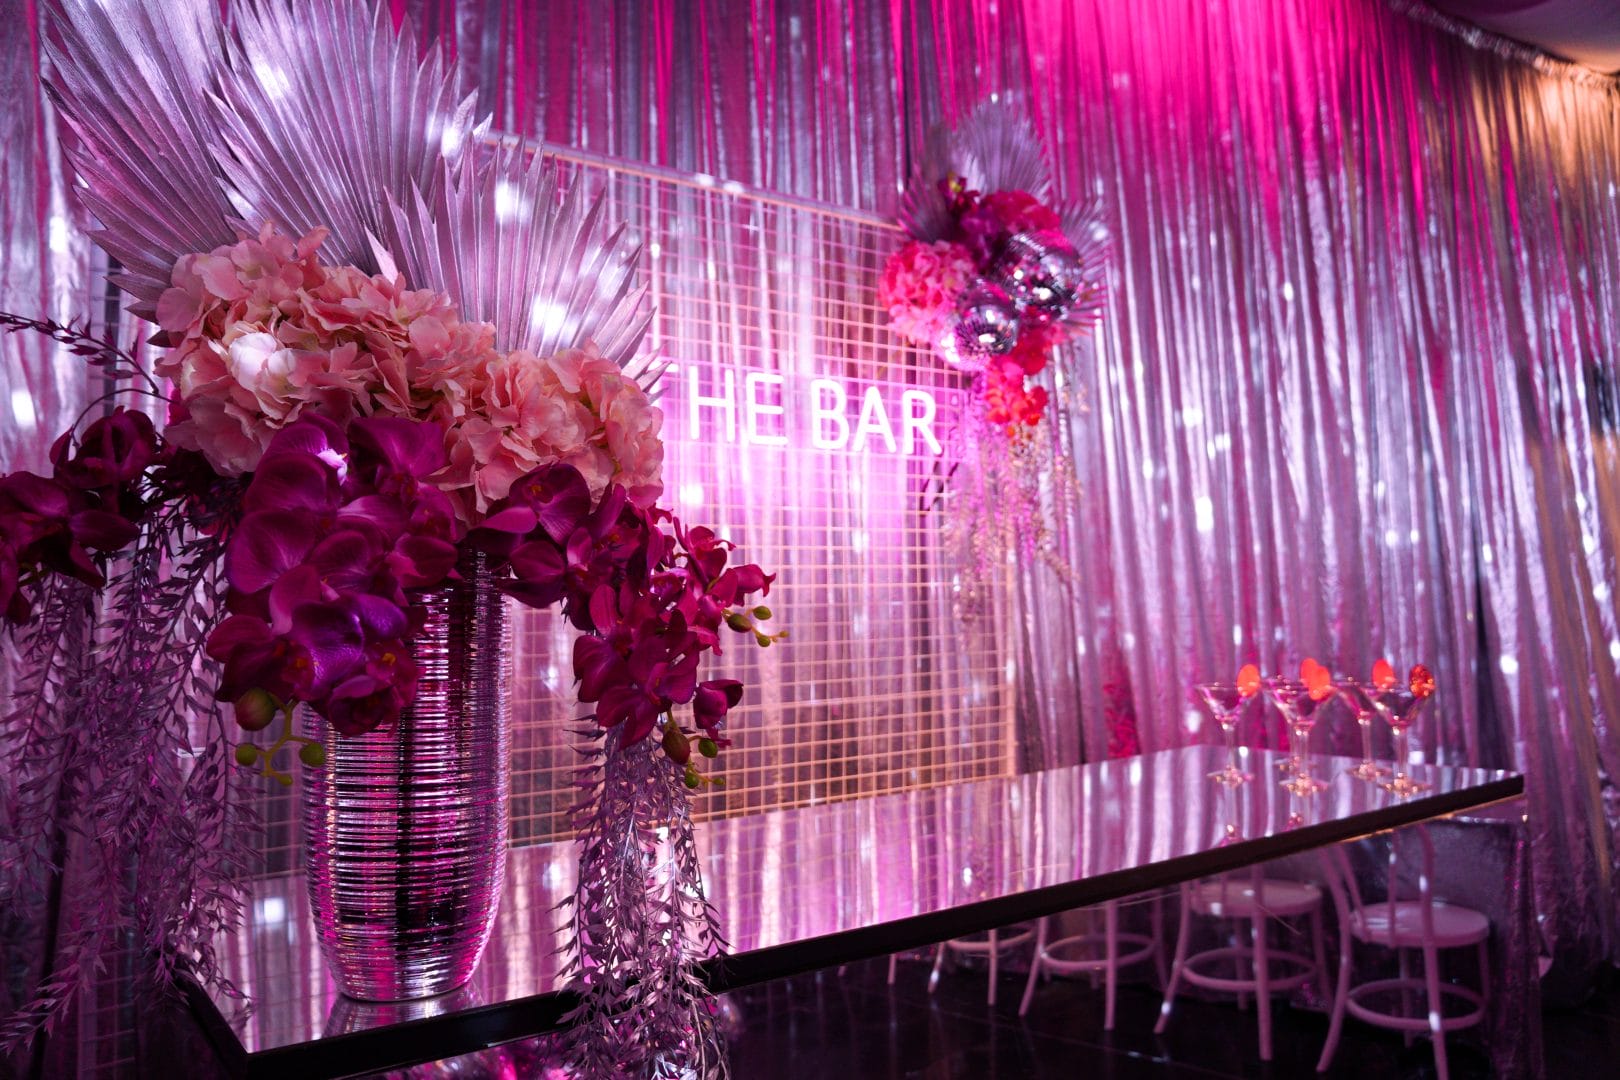 the bar at a pink disco dinner party setup. Area features a pink acrylic bar, florals, a mesh backdrop, and a pink neon 'the bar' sign